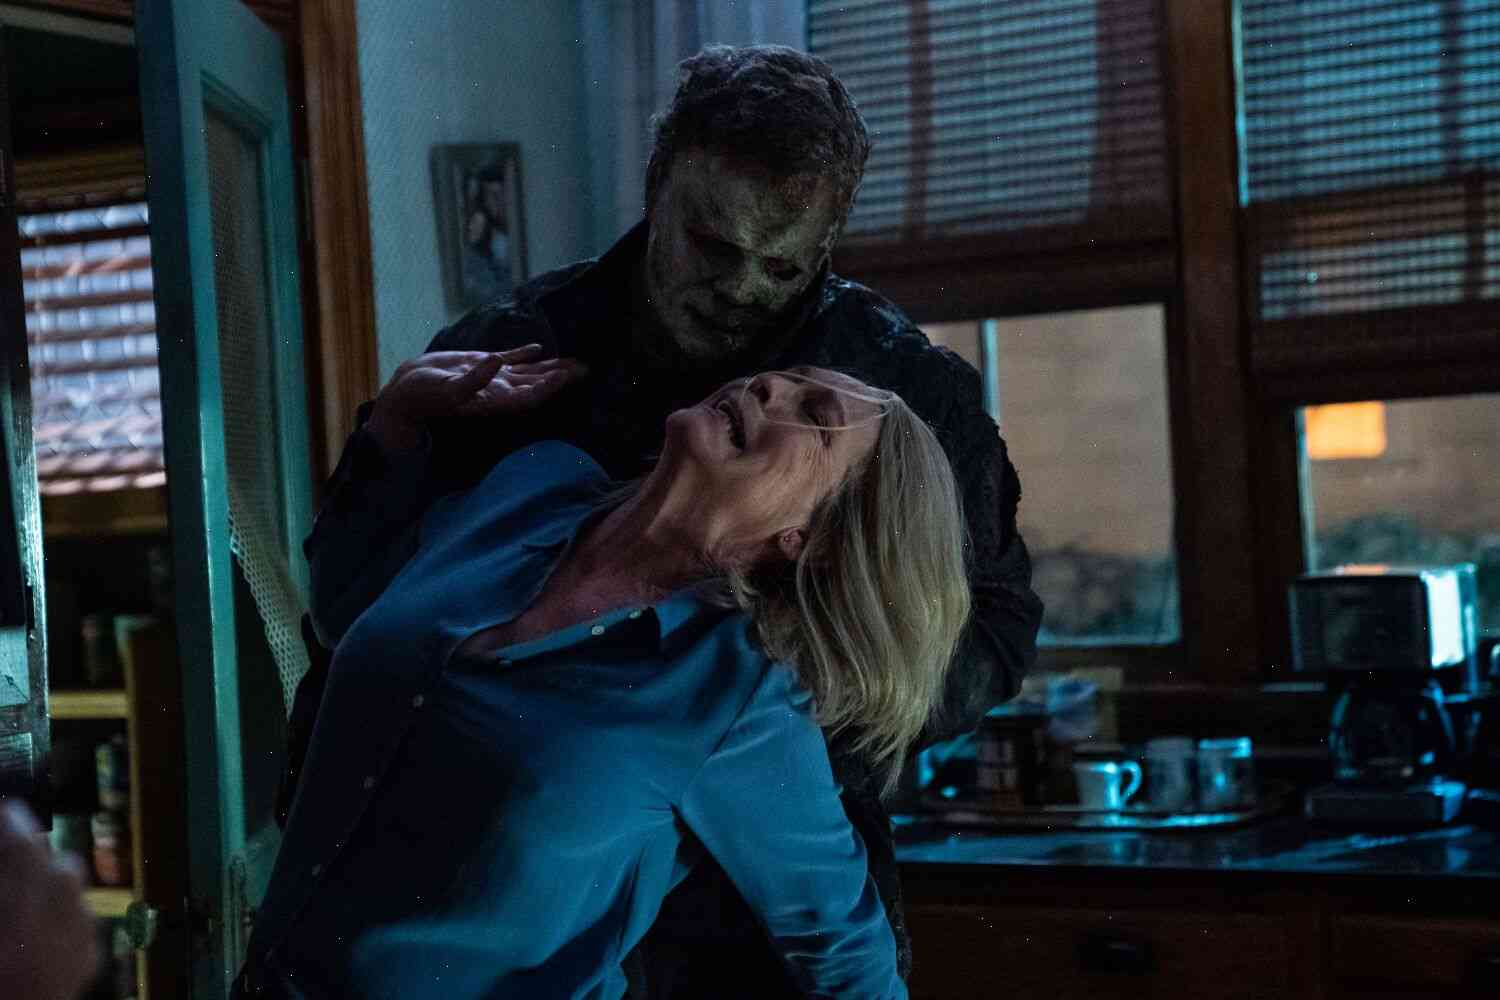 'Halloween' opens to $10 million - the biggest horror film of the year